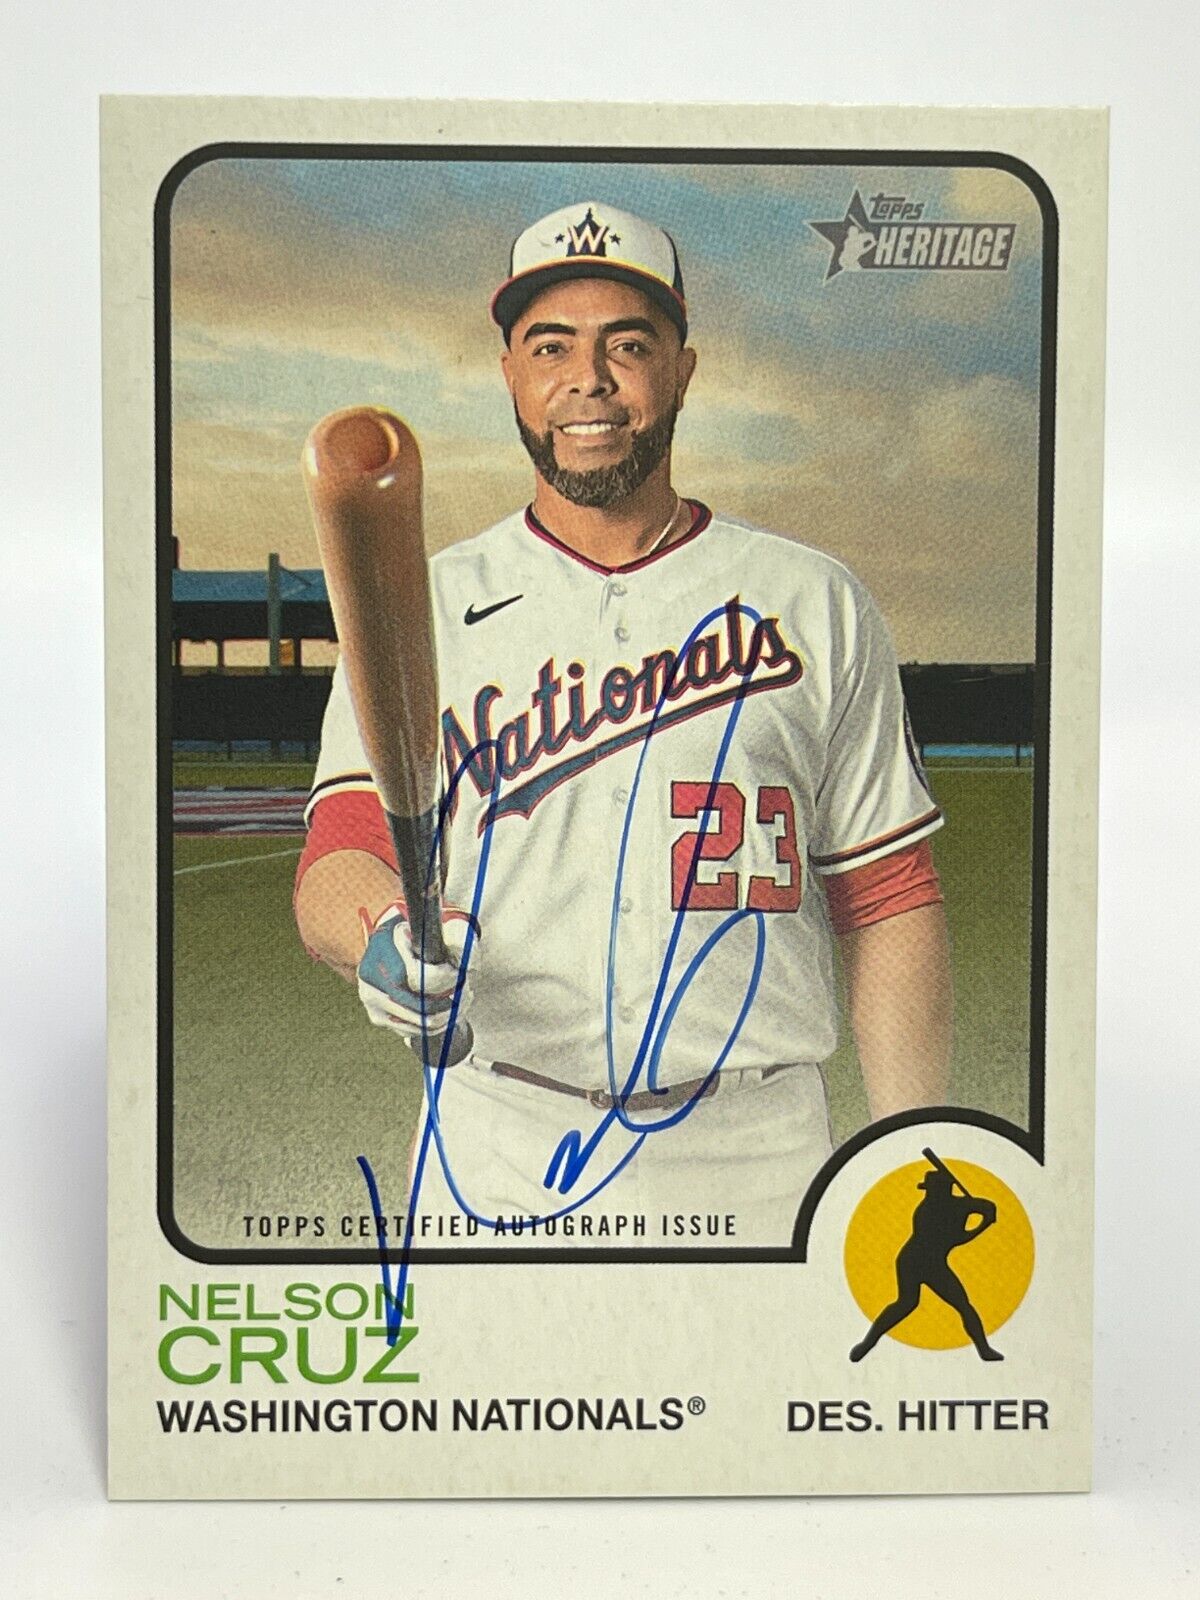 2022 Topps Heritage High NELSON CRUZ Nationals Auto AUTOGRAPH 